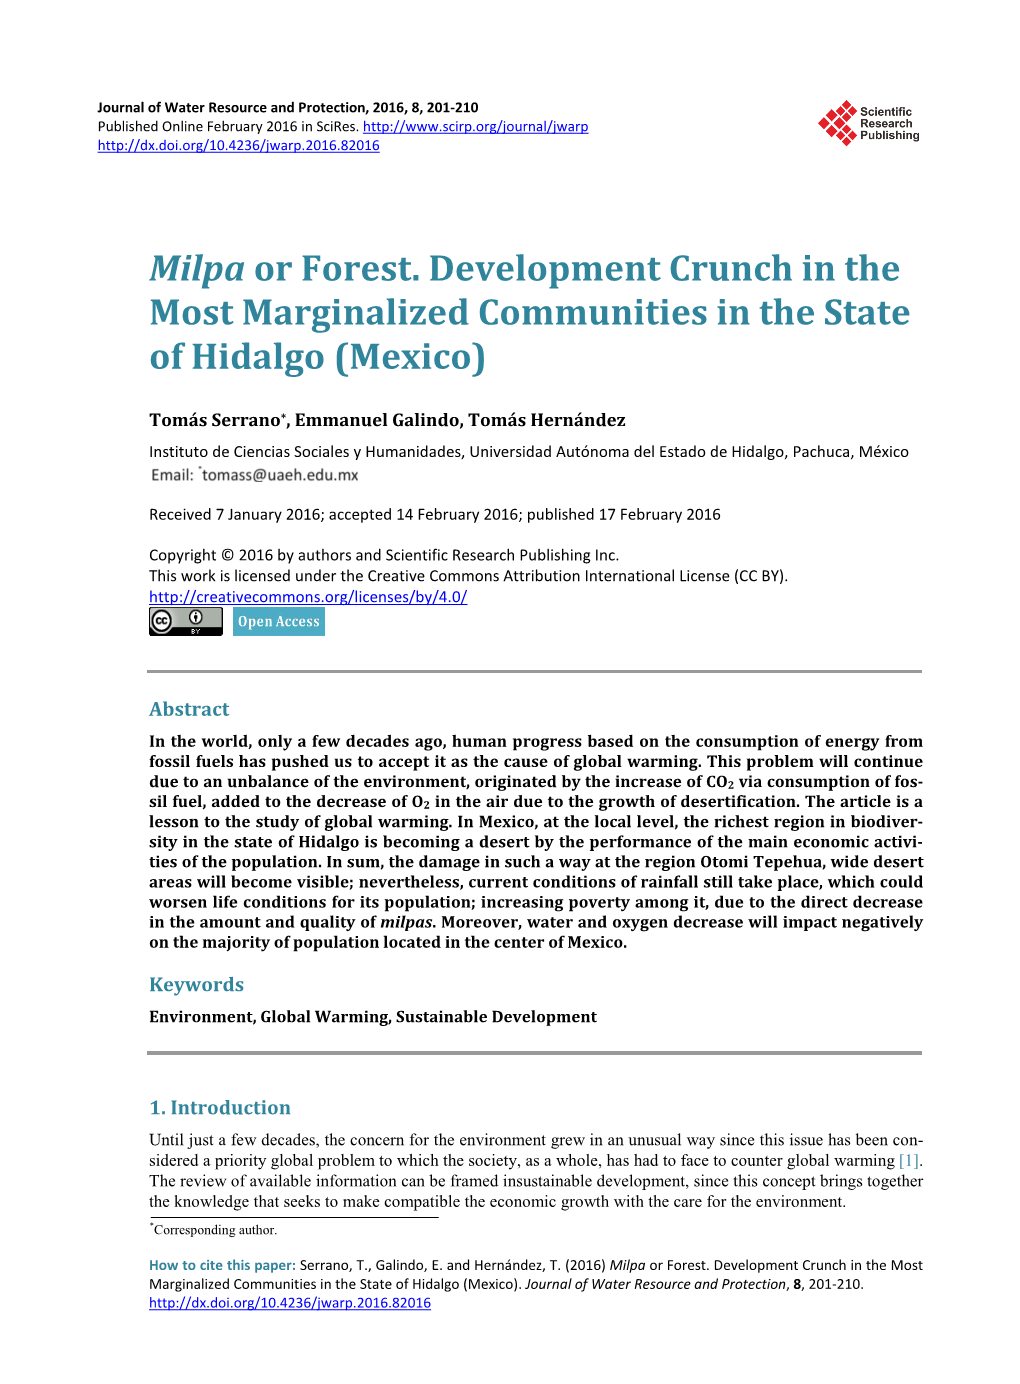 Milpa Or Forest. Development Crunch in the Most Marginalized Communities in the State of Hidalgo (Mexico)